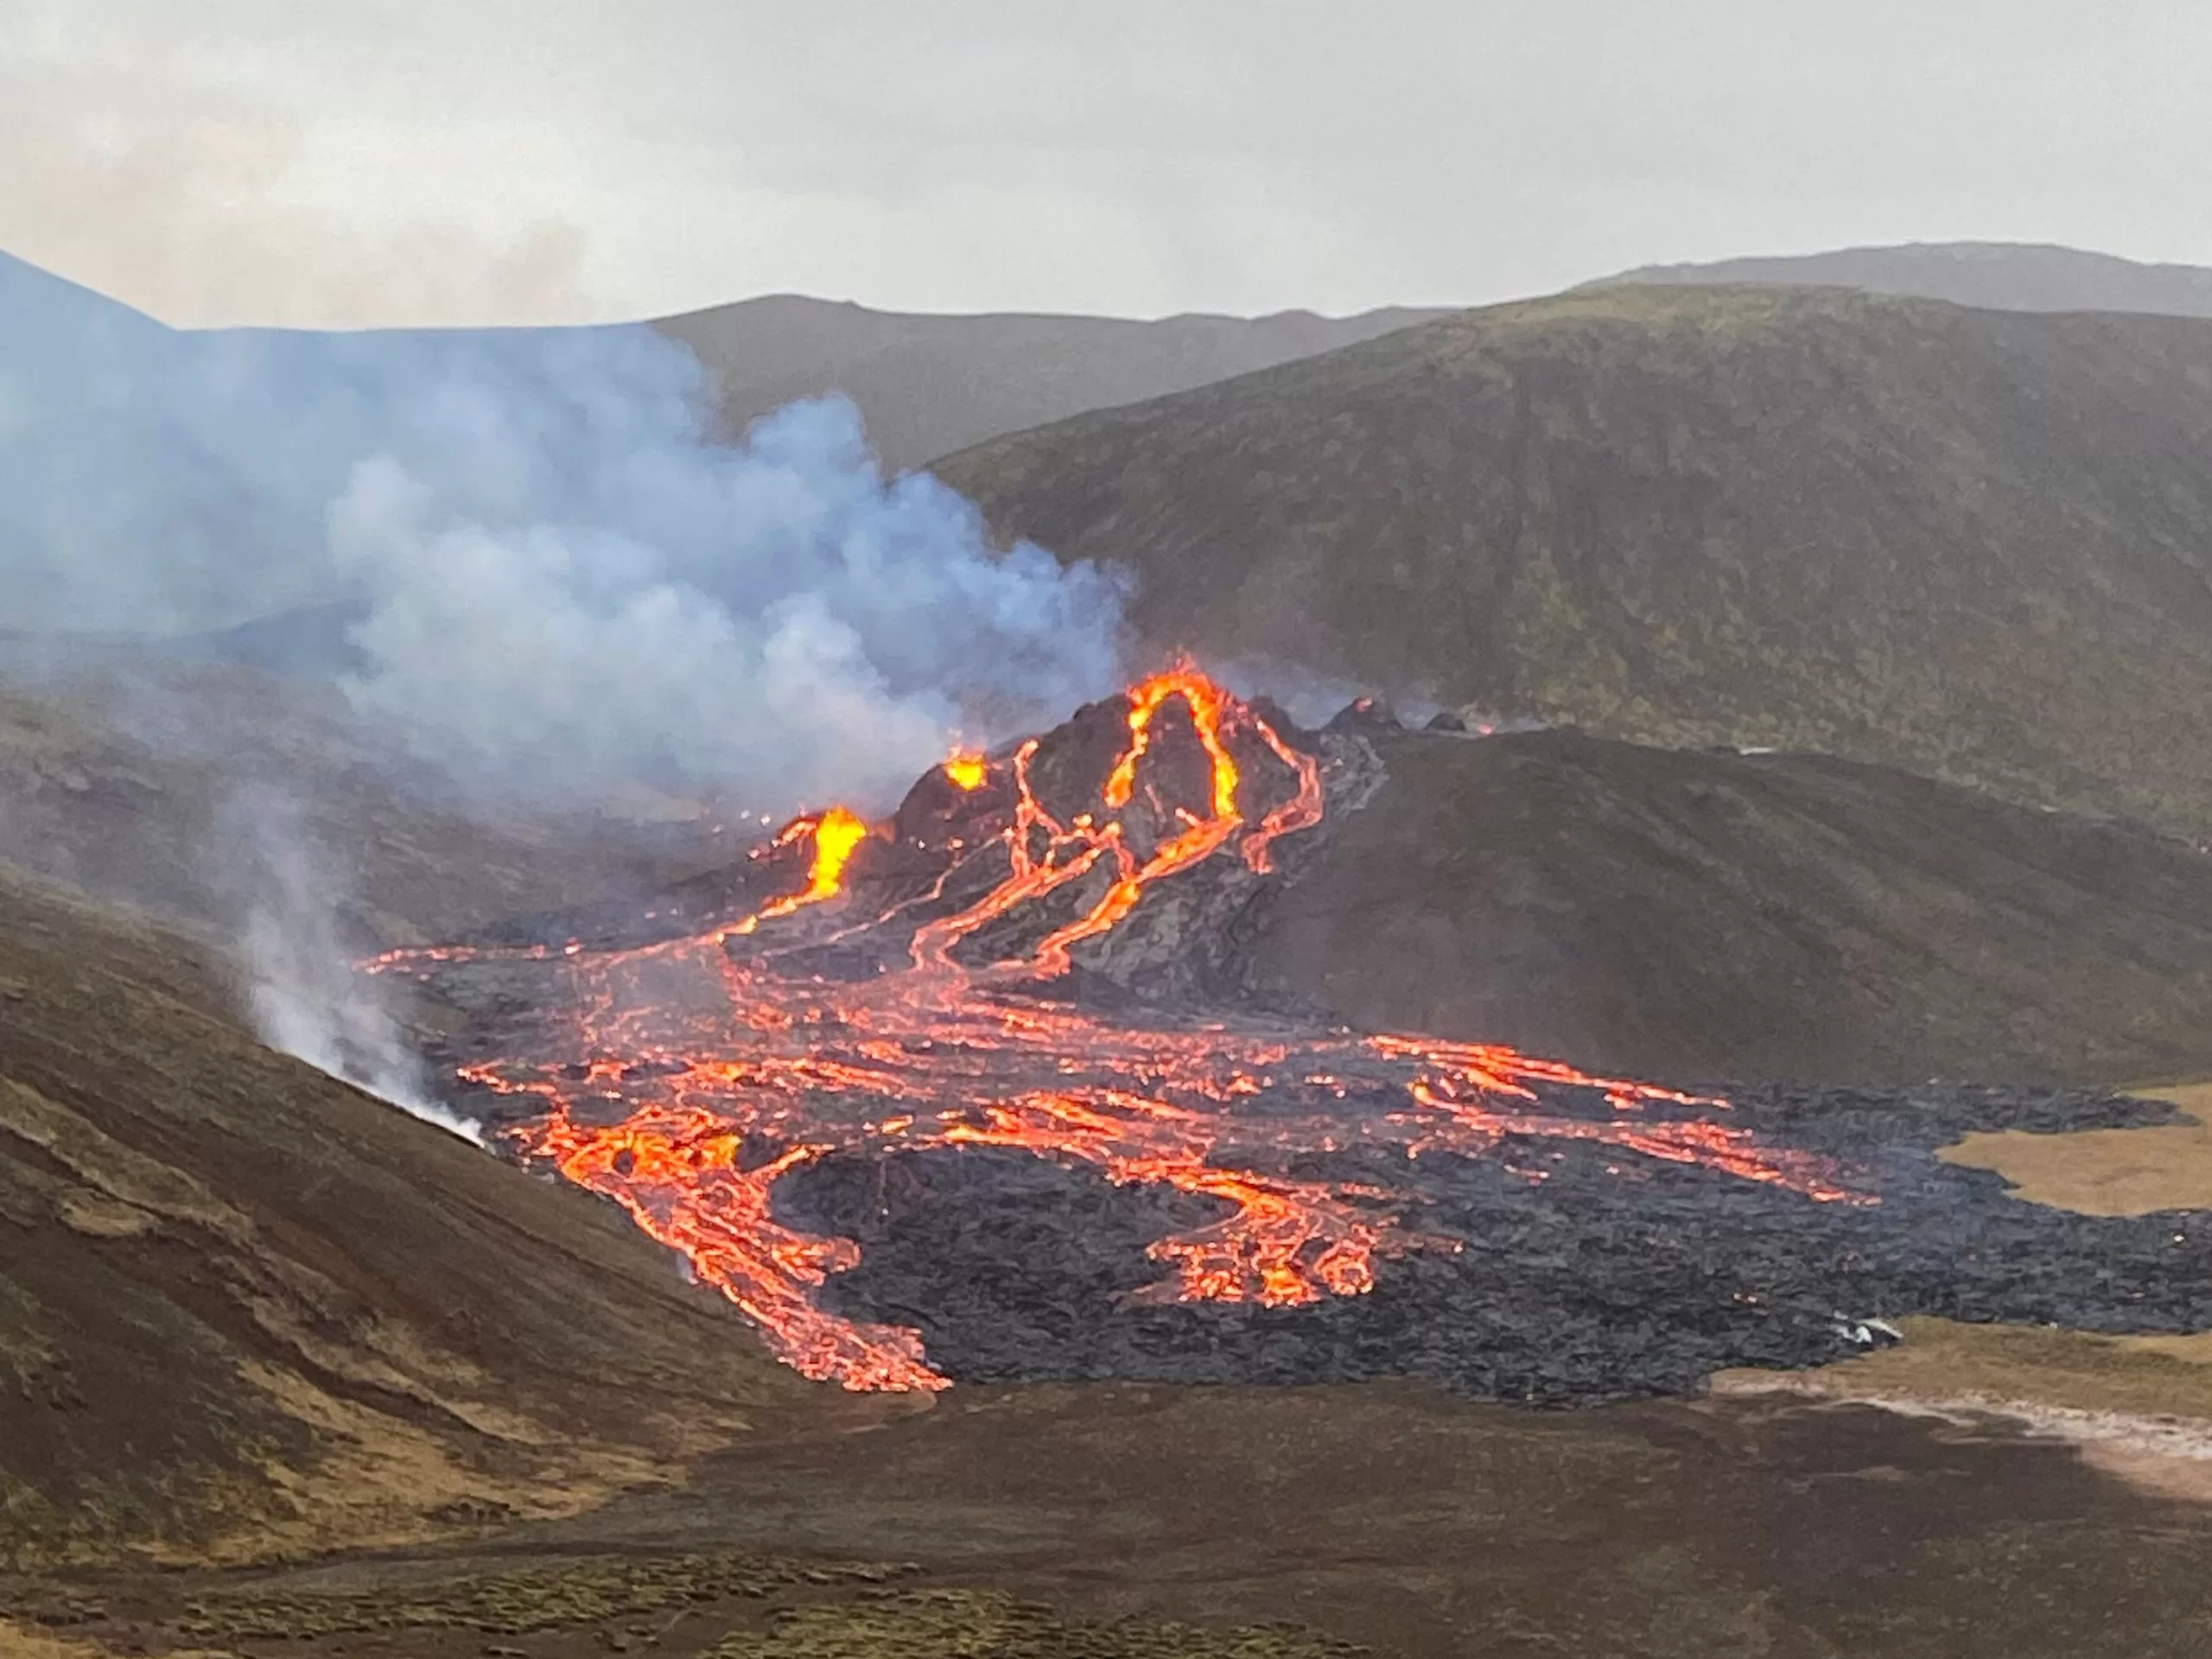 On the Reykjanes peninsula of Iceland, a volcano erupts